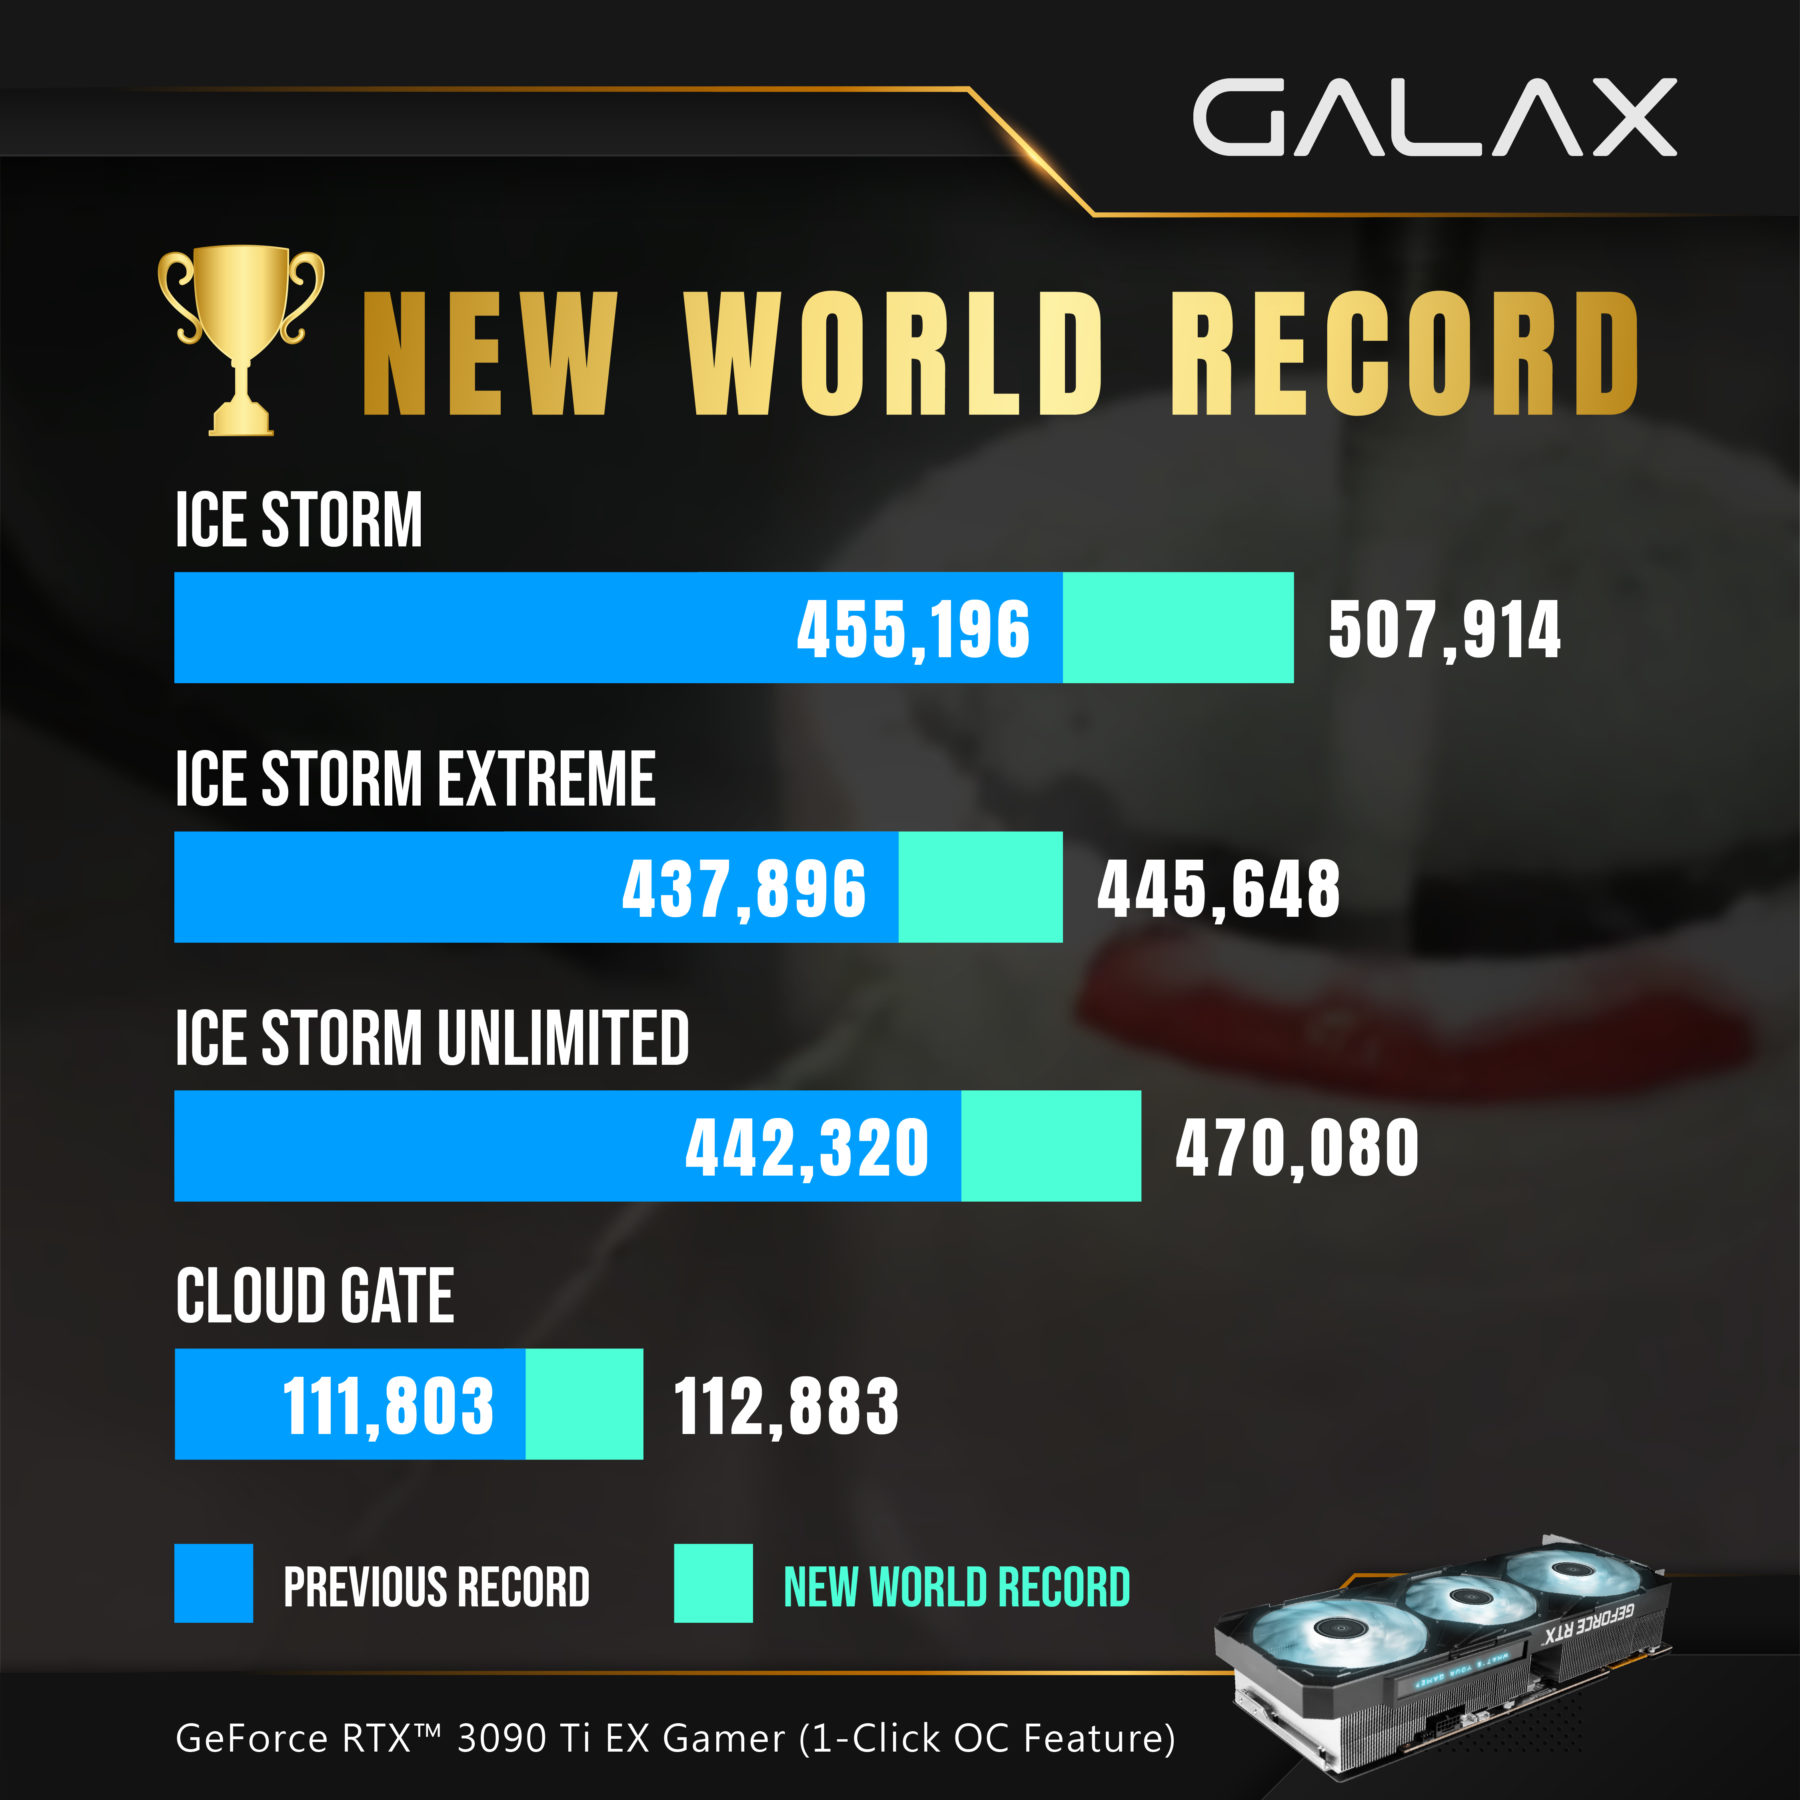 GALAX RTX 3090 Ti Breaks 7 World Records with 900W of Extreme Overclocking Power - returnal